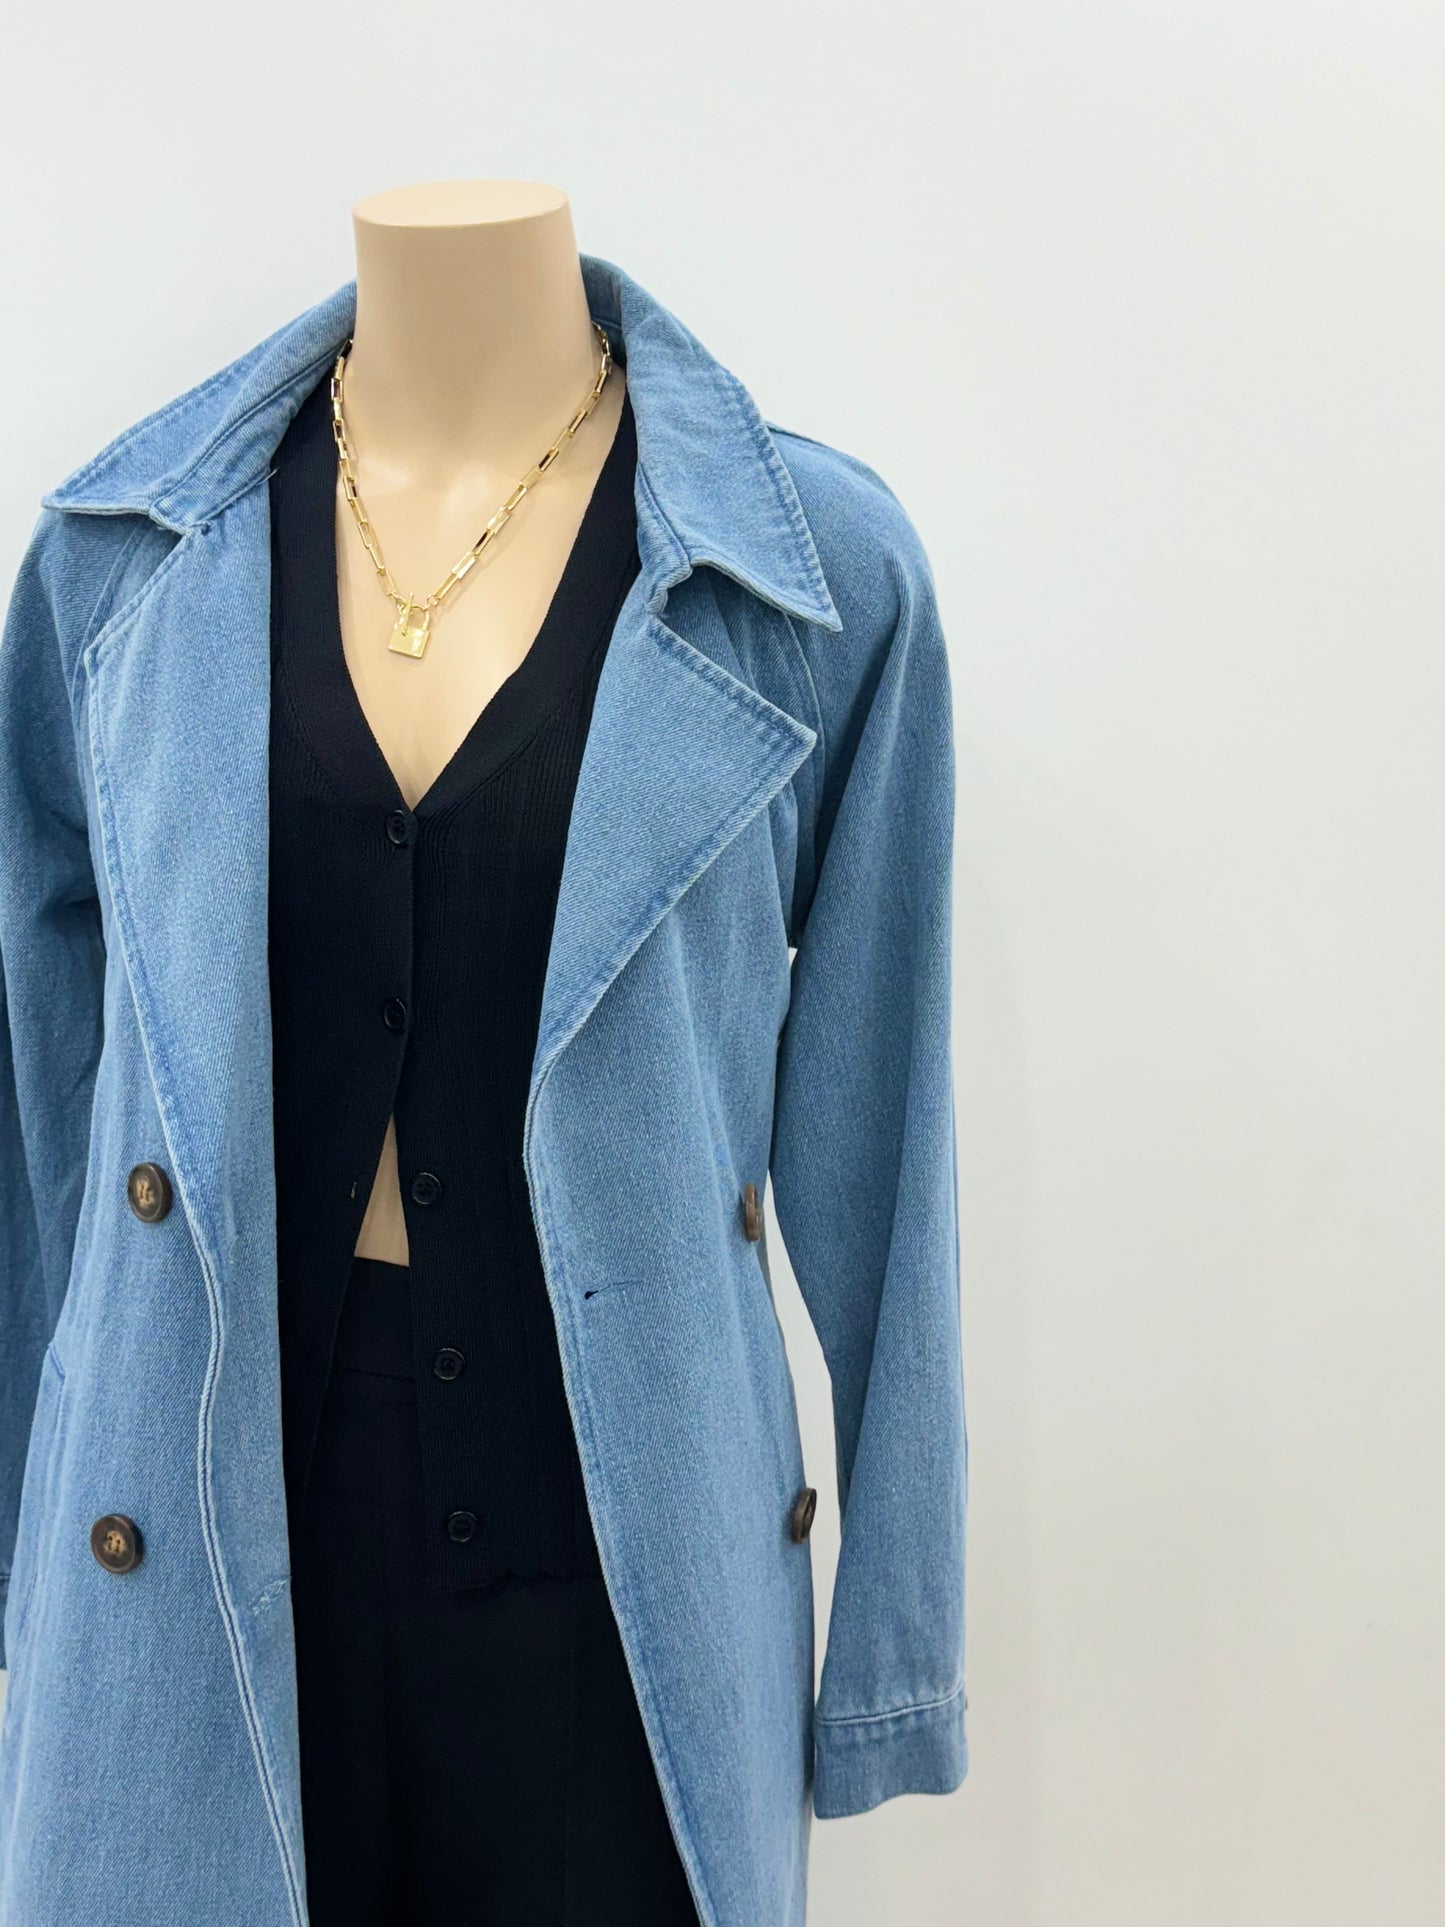 The Donna Denim Trench Coat - Mid Blue